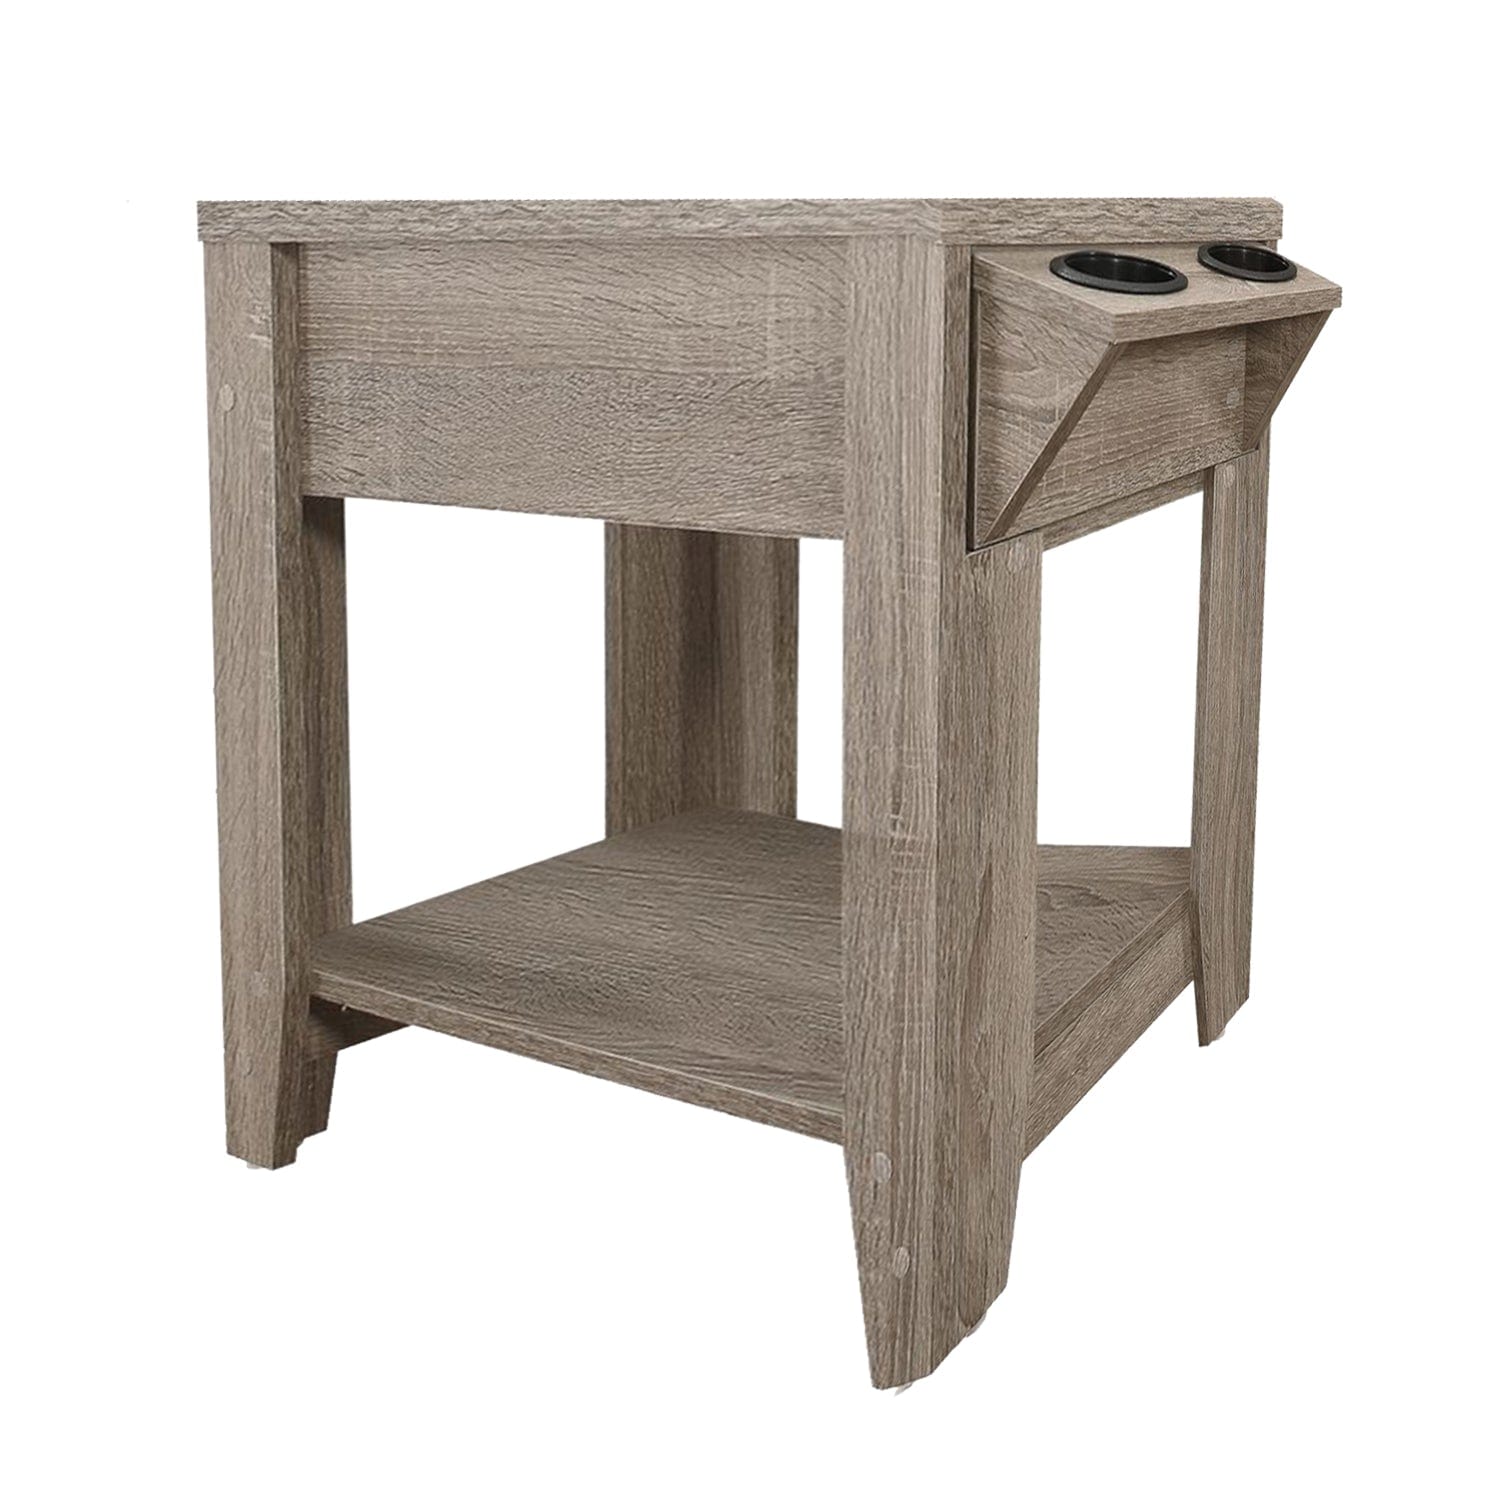 Taupe End Table With Shelf and Drawer